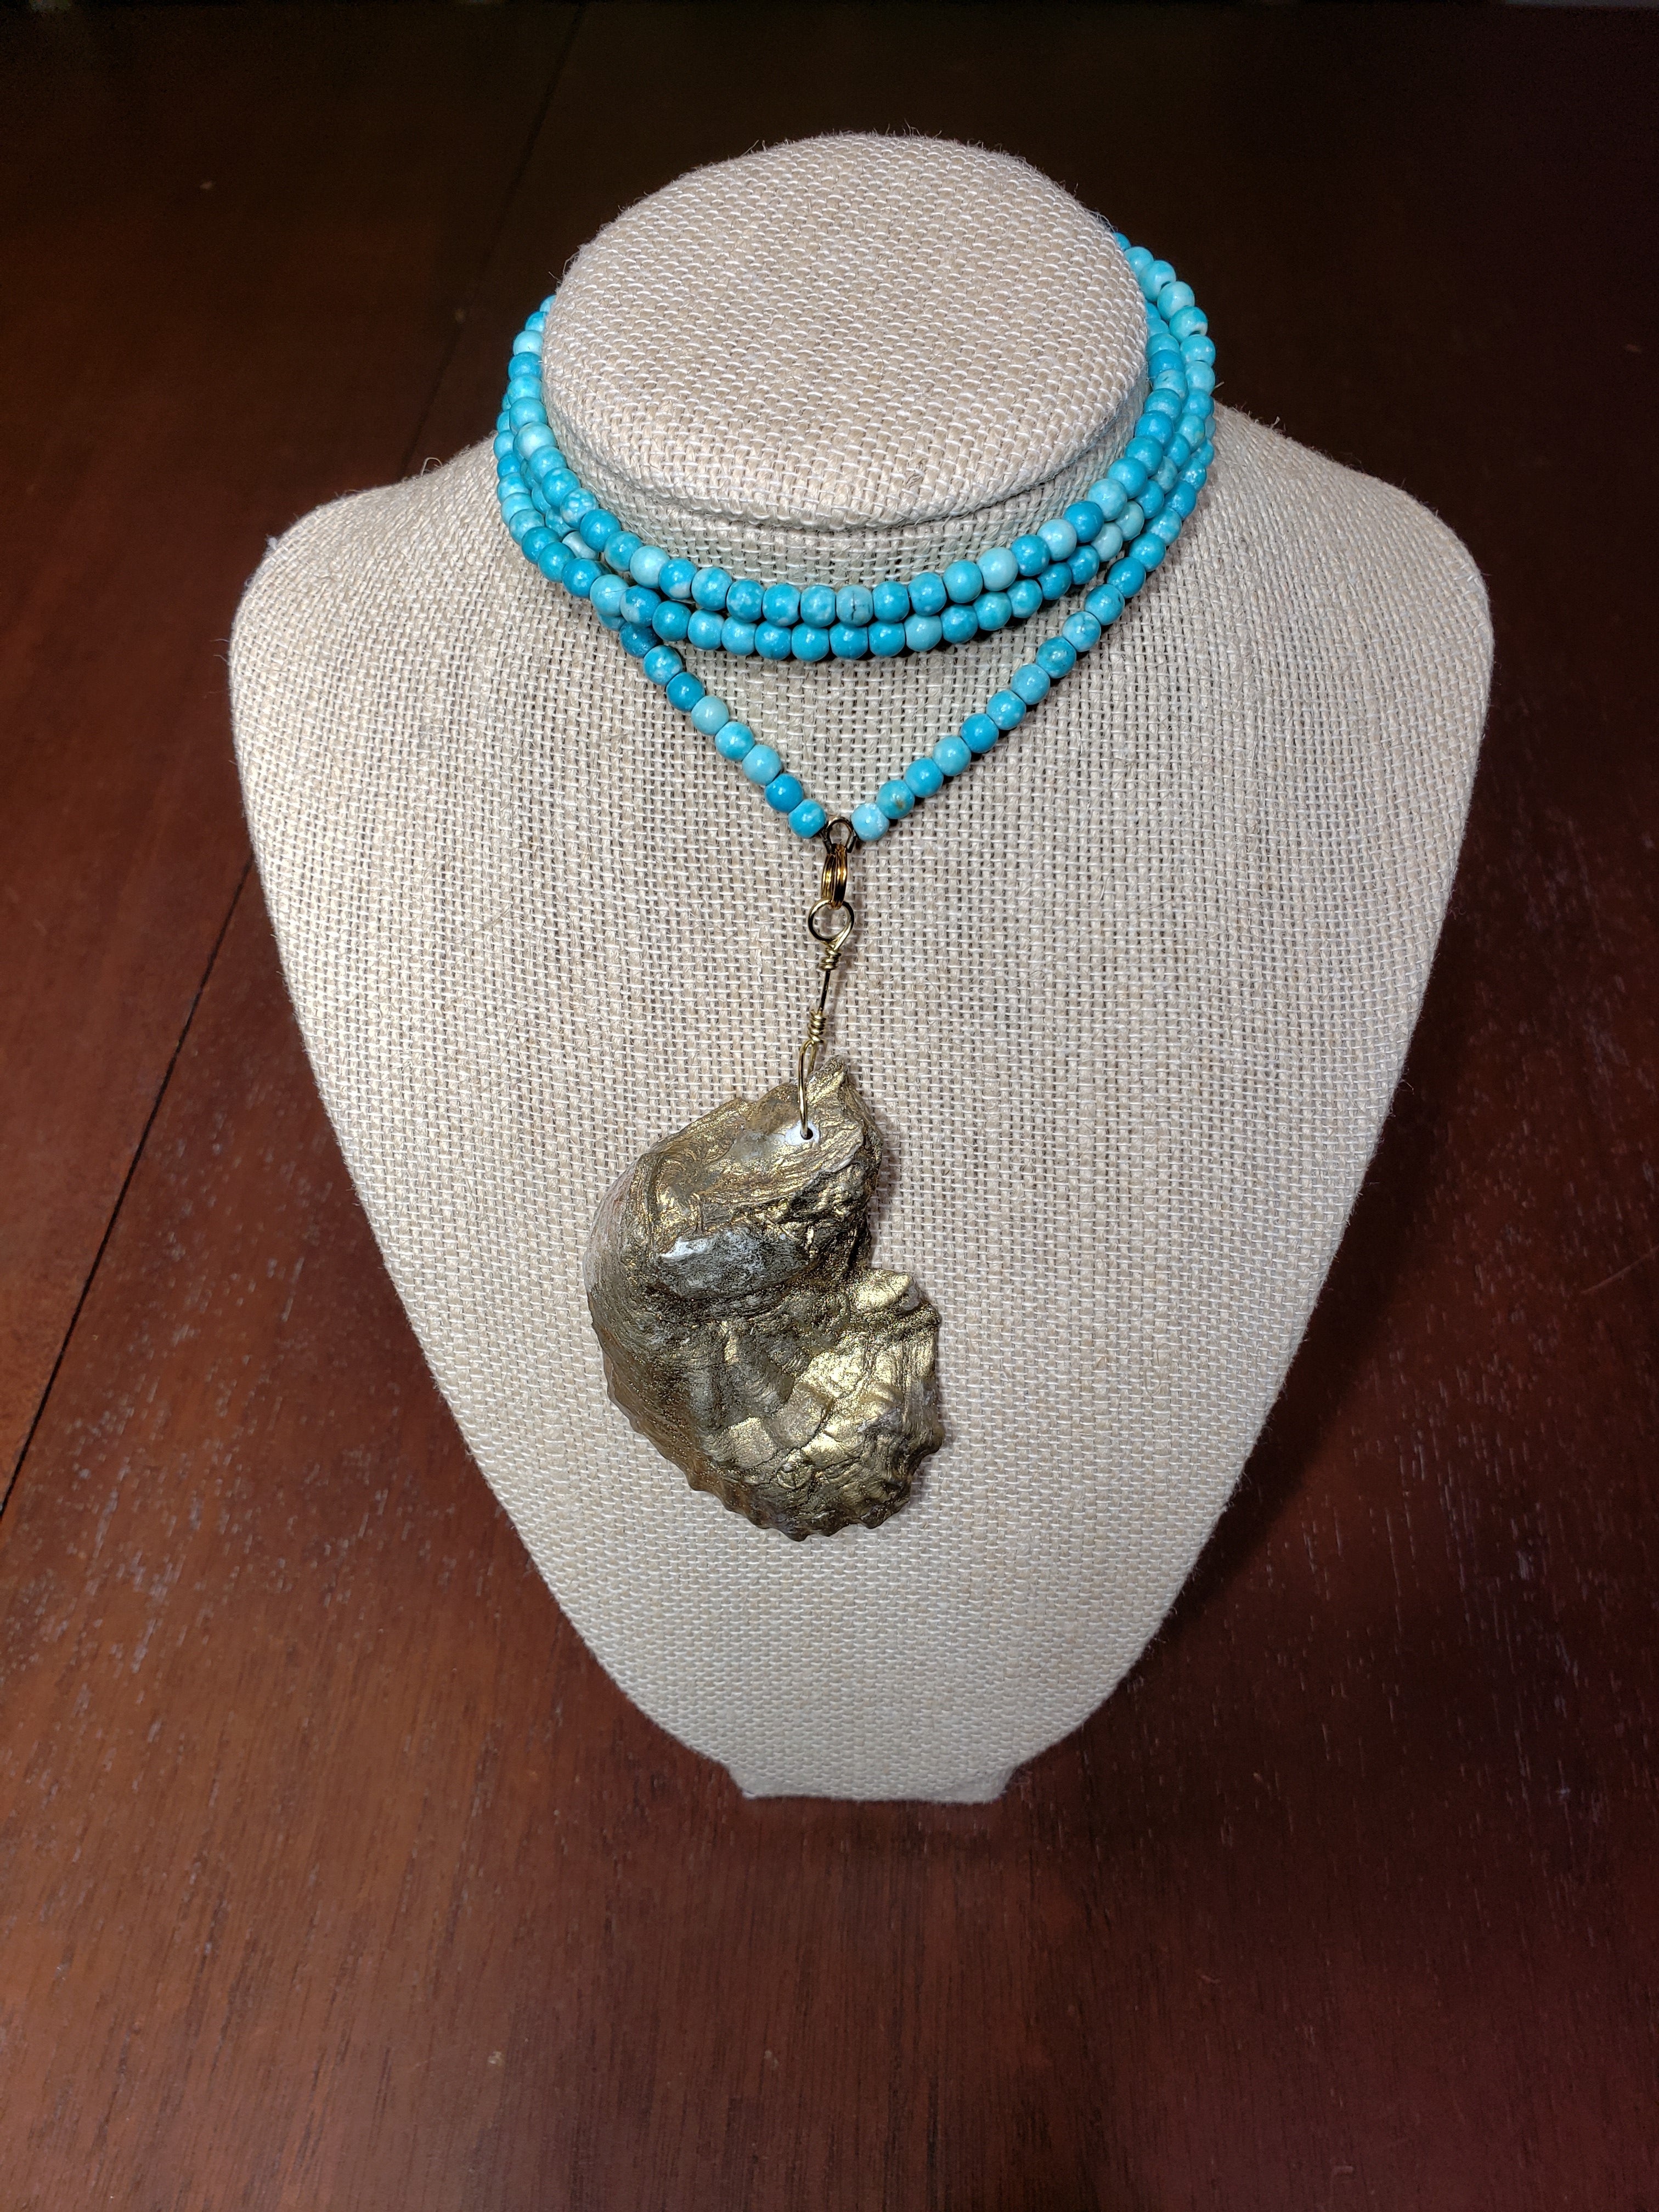 Teal Oyster Necklace - The Look By Lucy